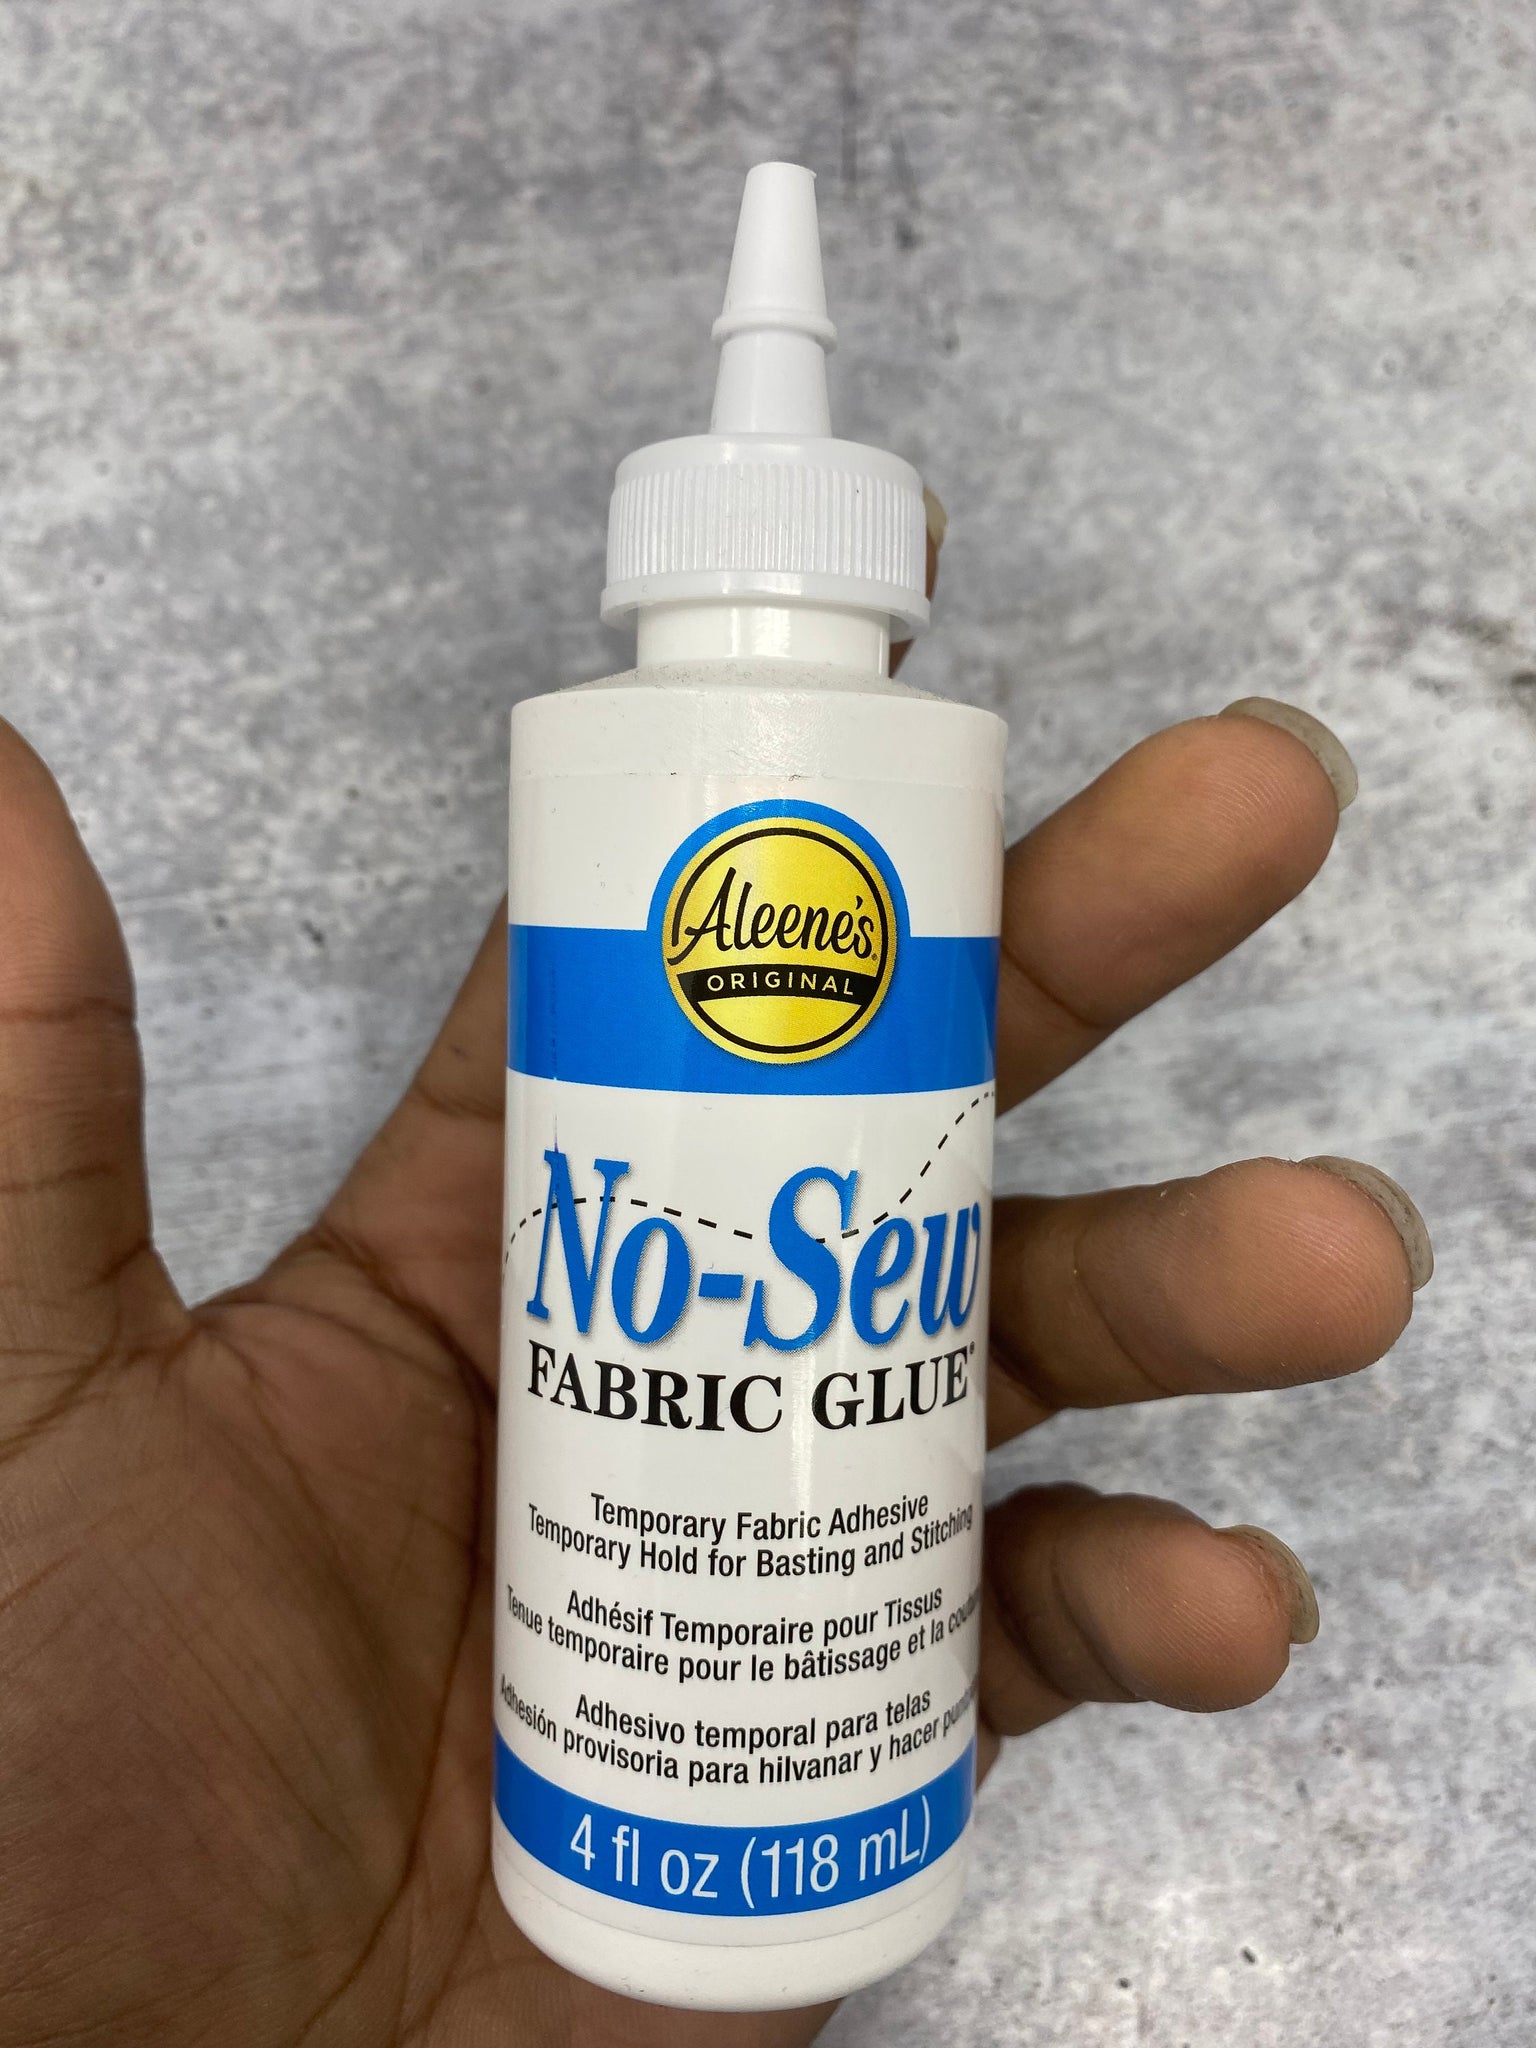 NEW, No- Sew Fabric Glue, Temporary Fabric Adhesive, Temporary Hold For  Basting and Stitching, 4fl oz (118 mL)